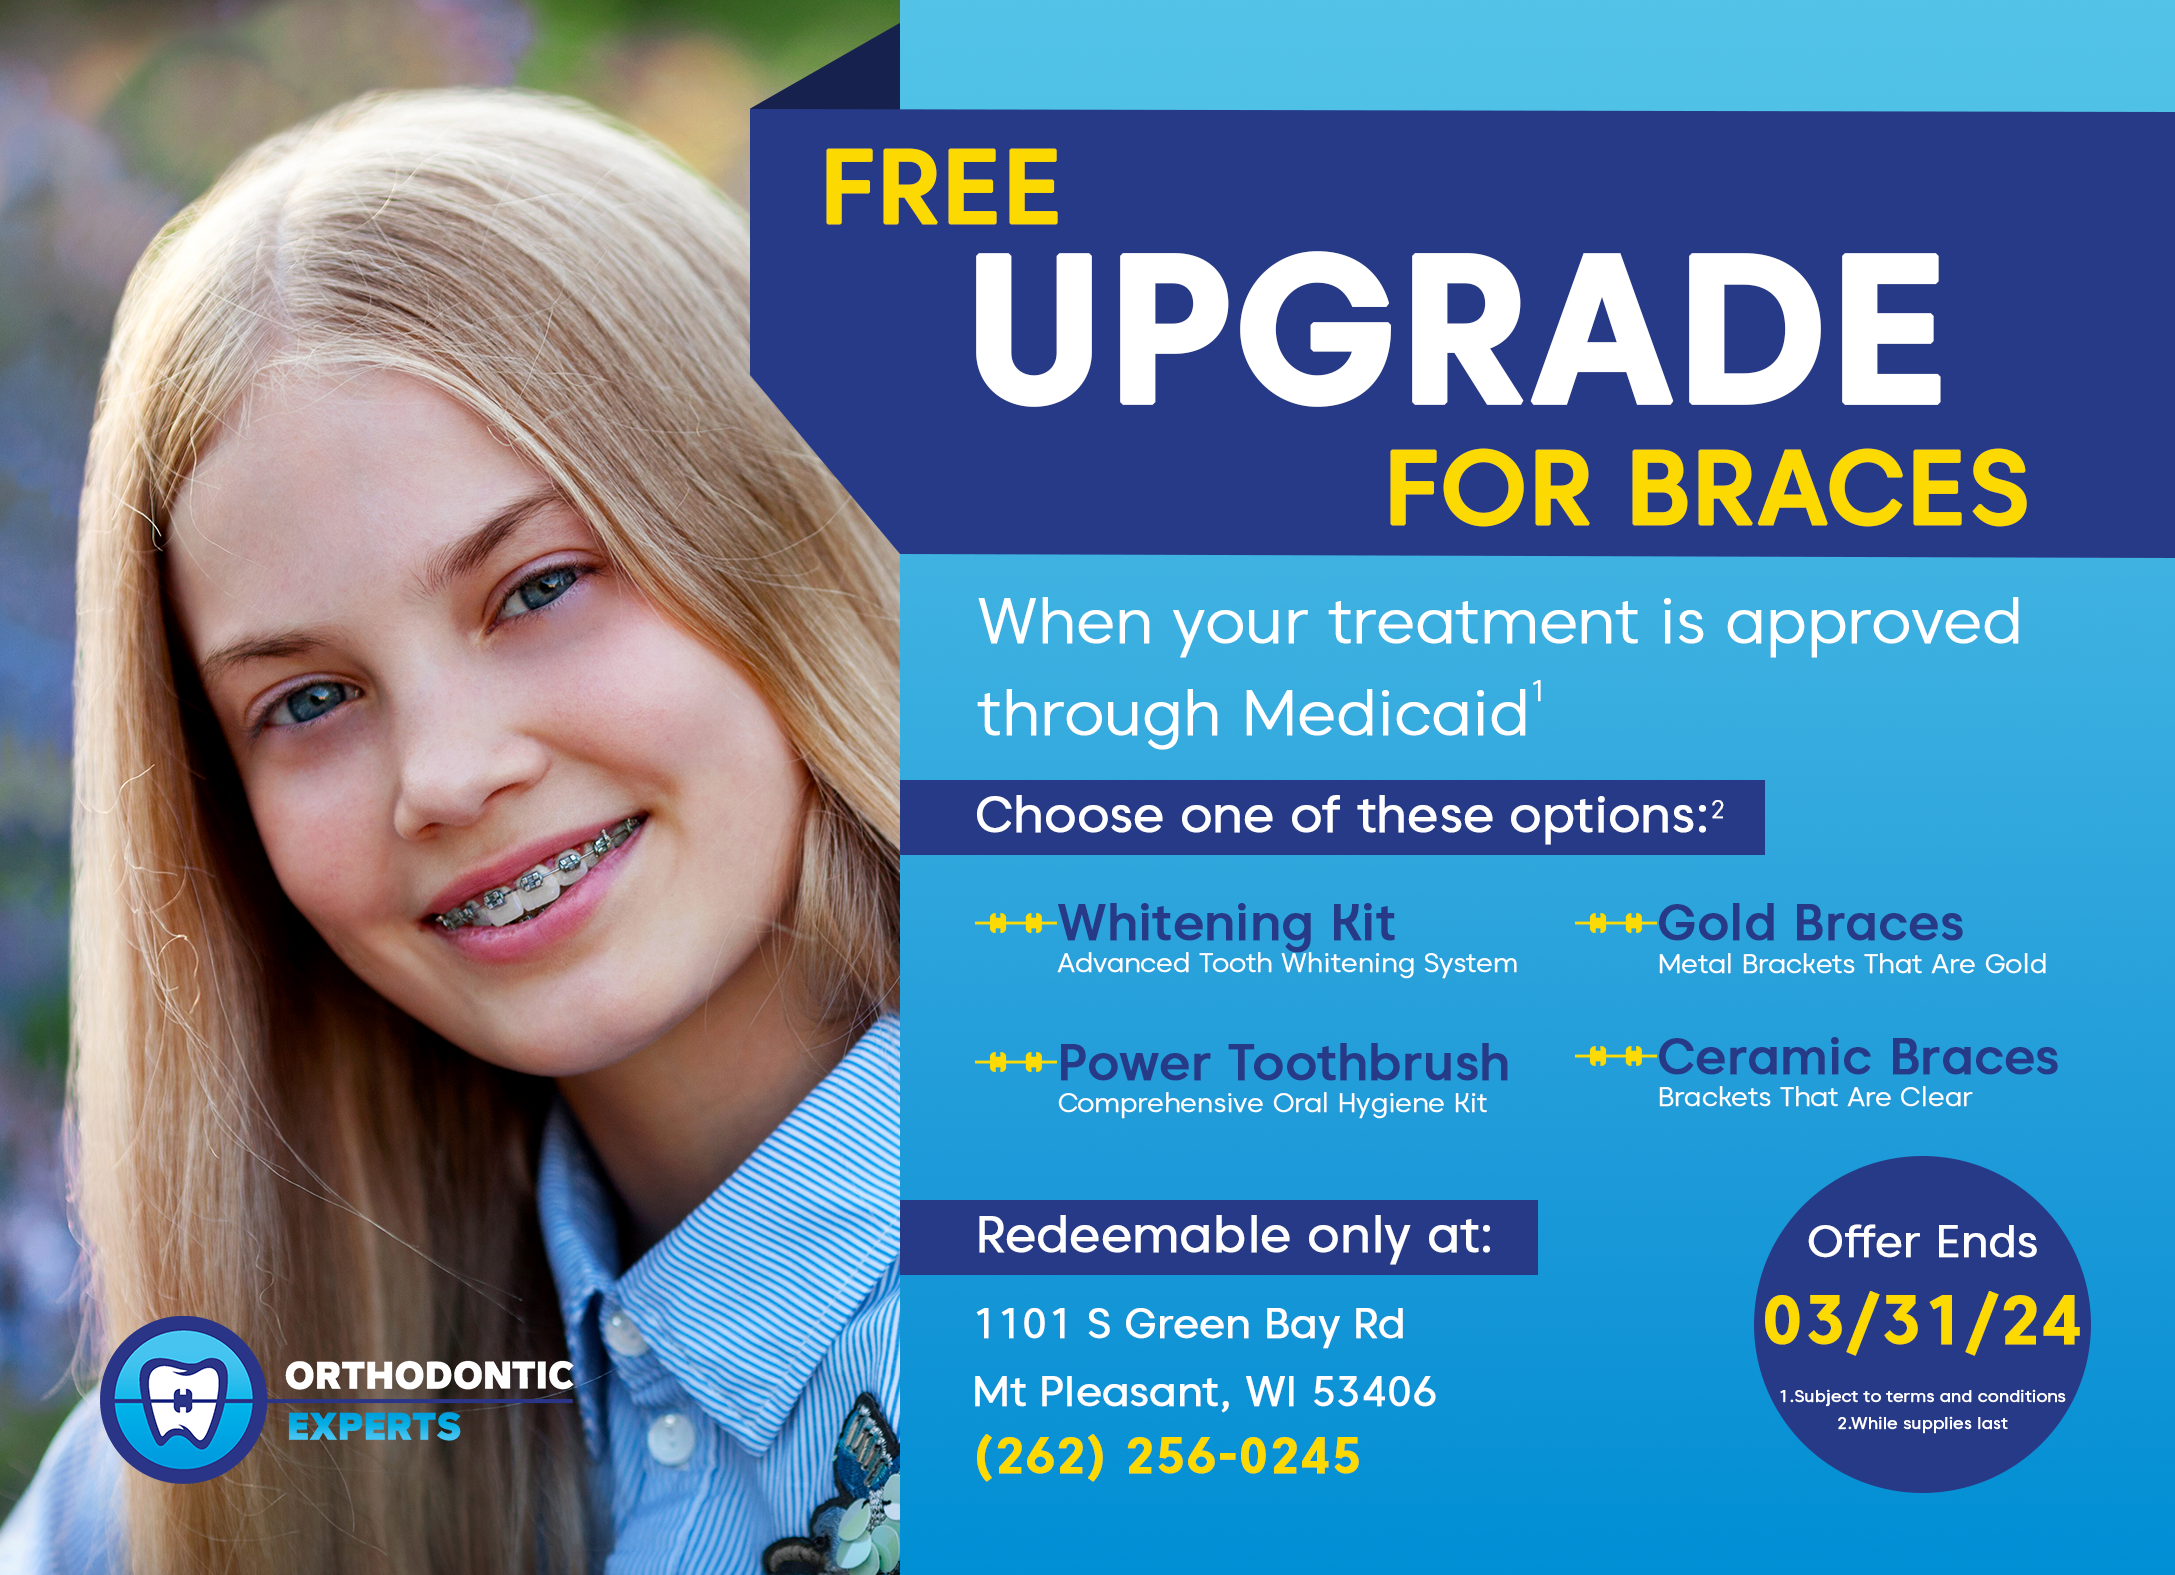 Free Upgrade for braces